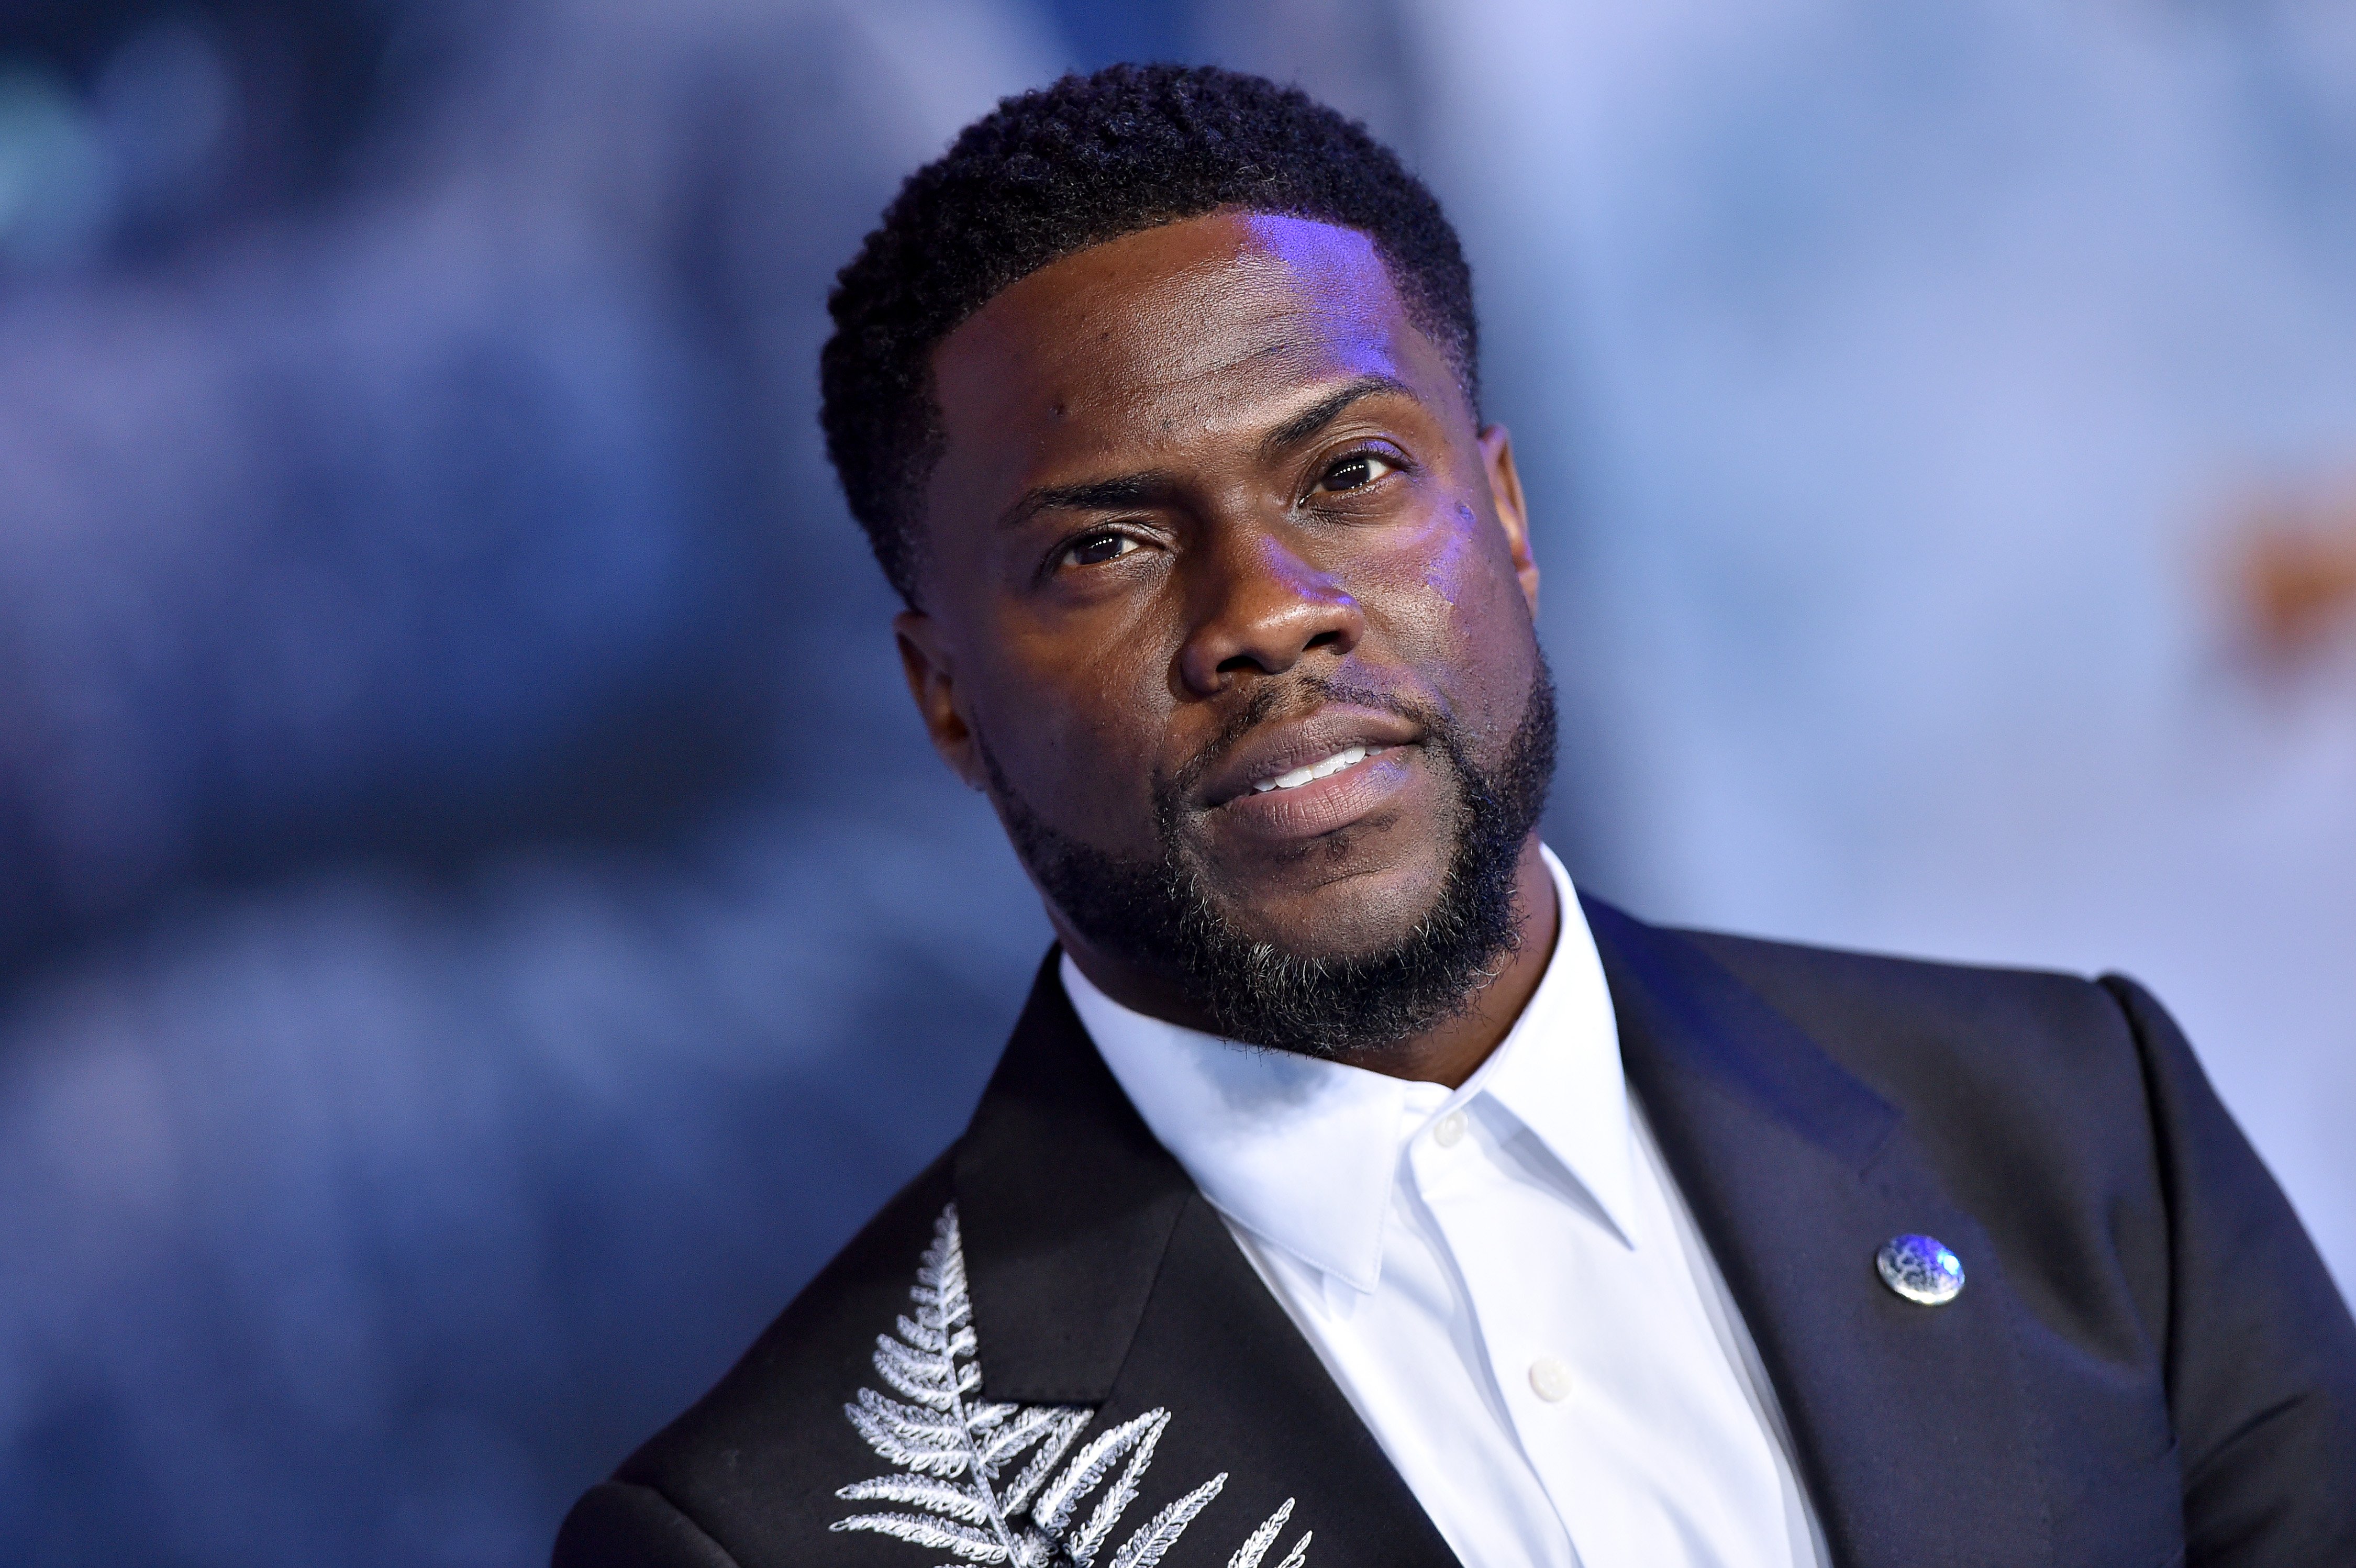 Kevin Hart attends the premiere of Sony Pictures' "Jumanji: The Next Level" on December 09, 2019 | Photo: GettyImages